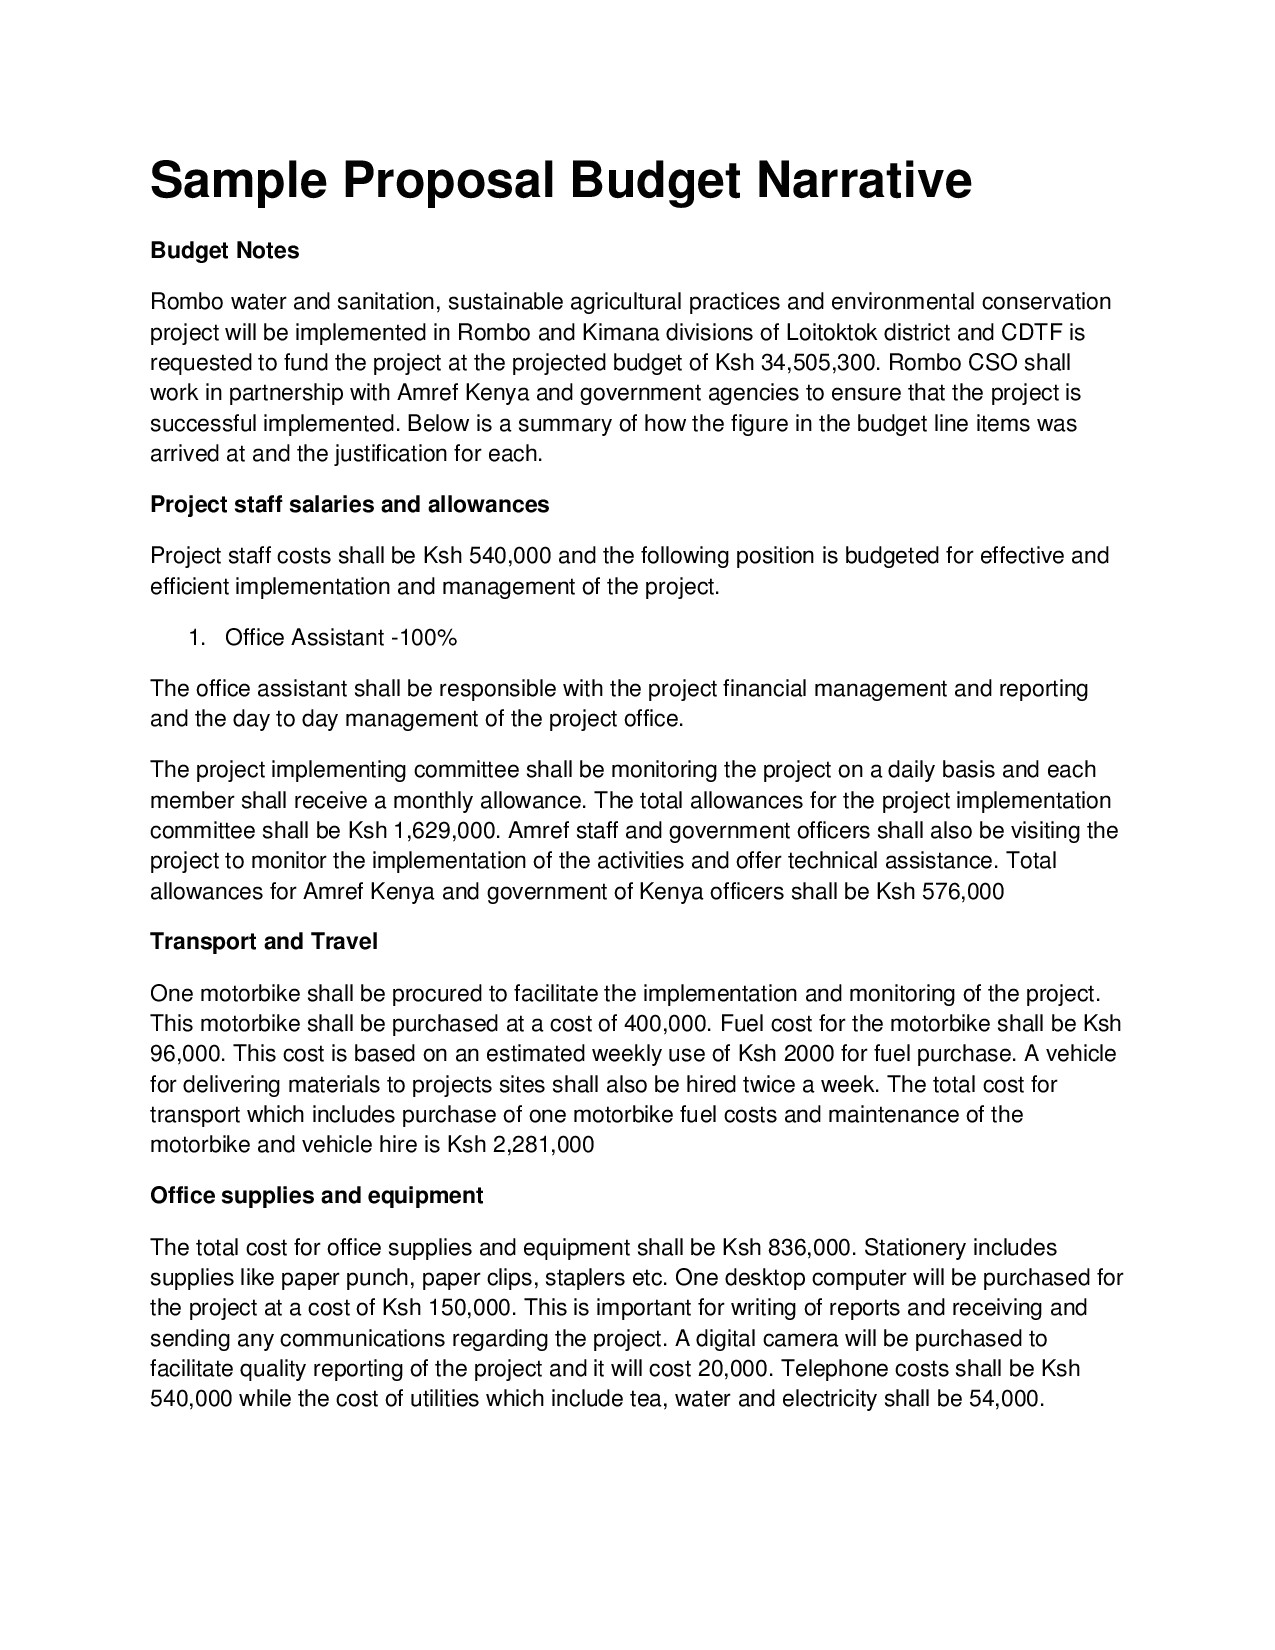 20 images of business budget narrative template download 24